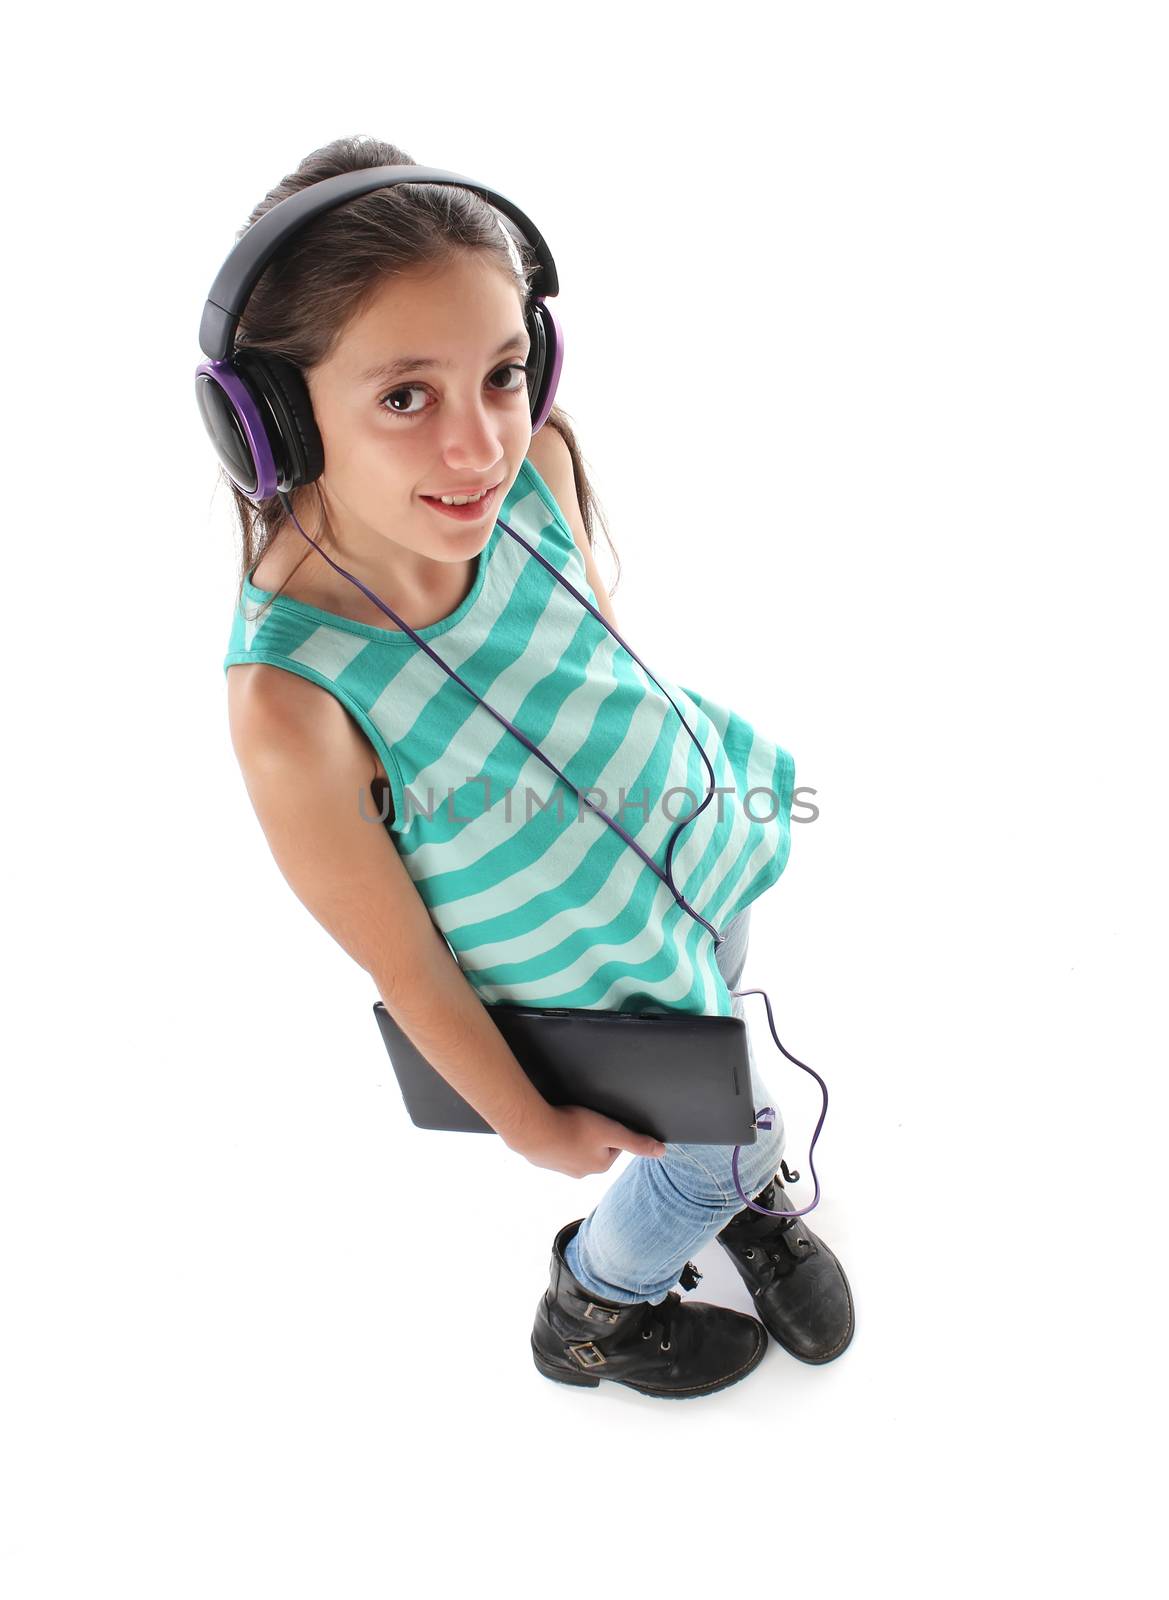 High angle picture for a beautiful pre-teen girl using a tablet computer and headphones by Erdosain